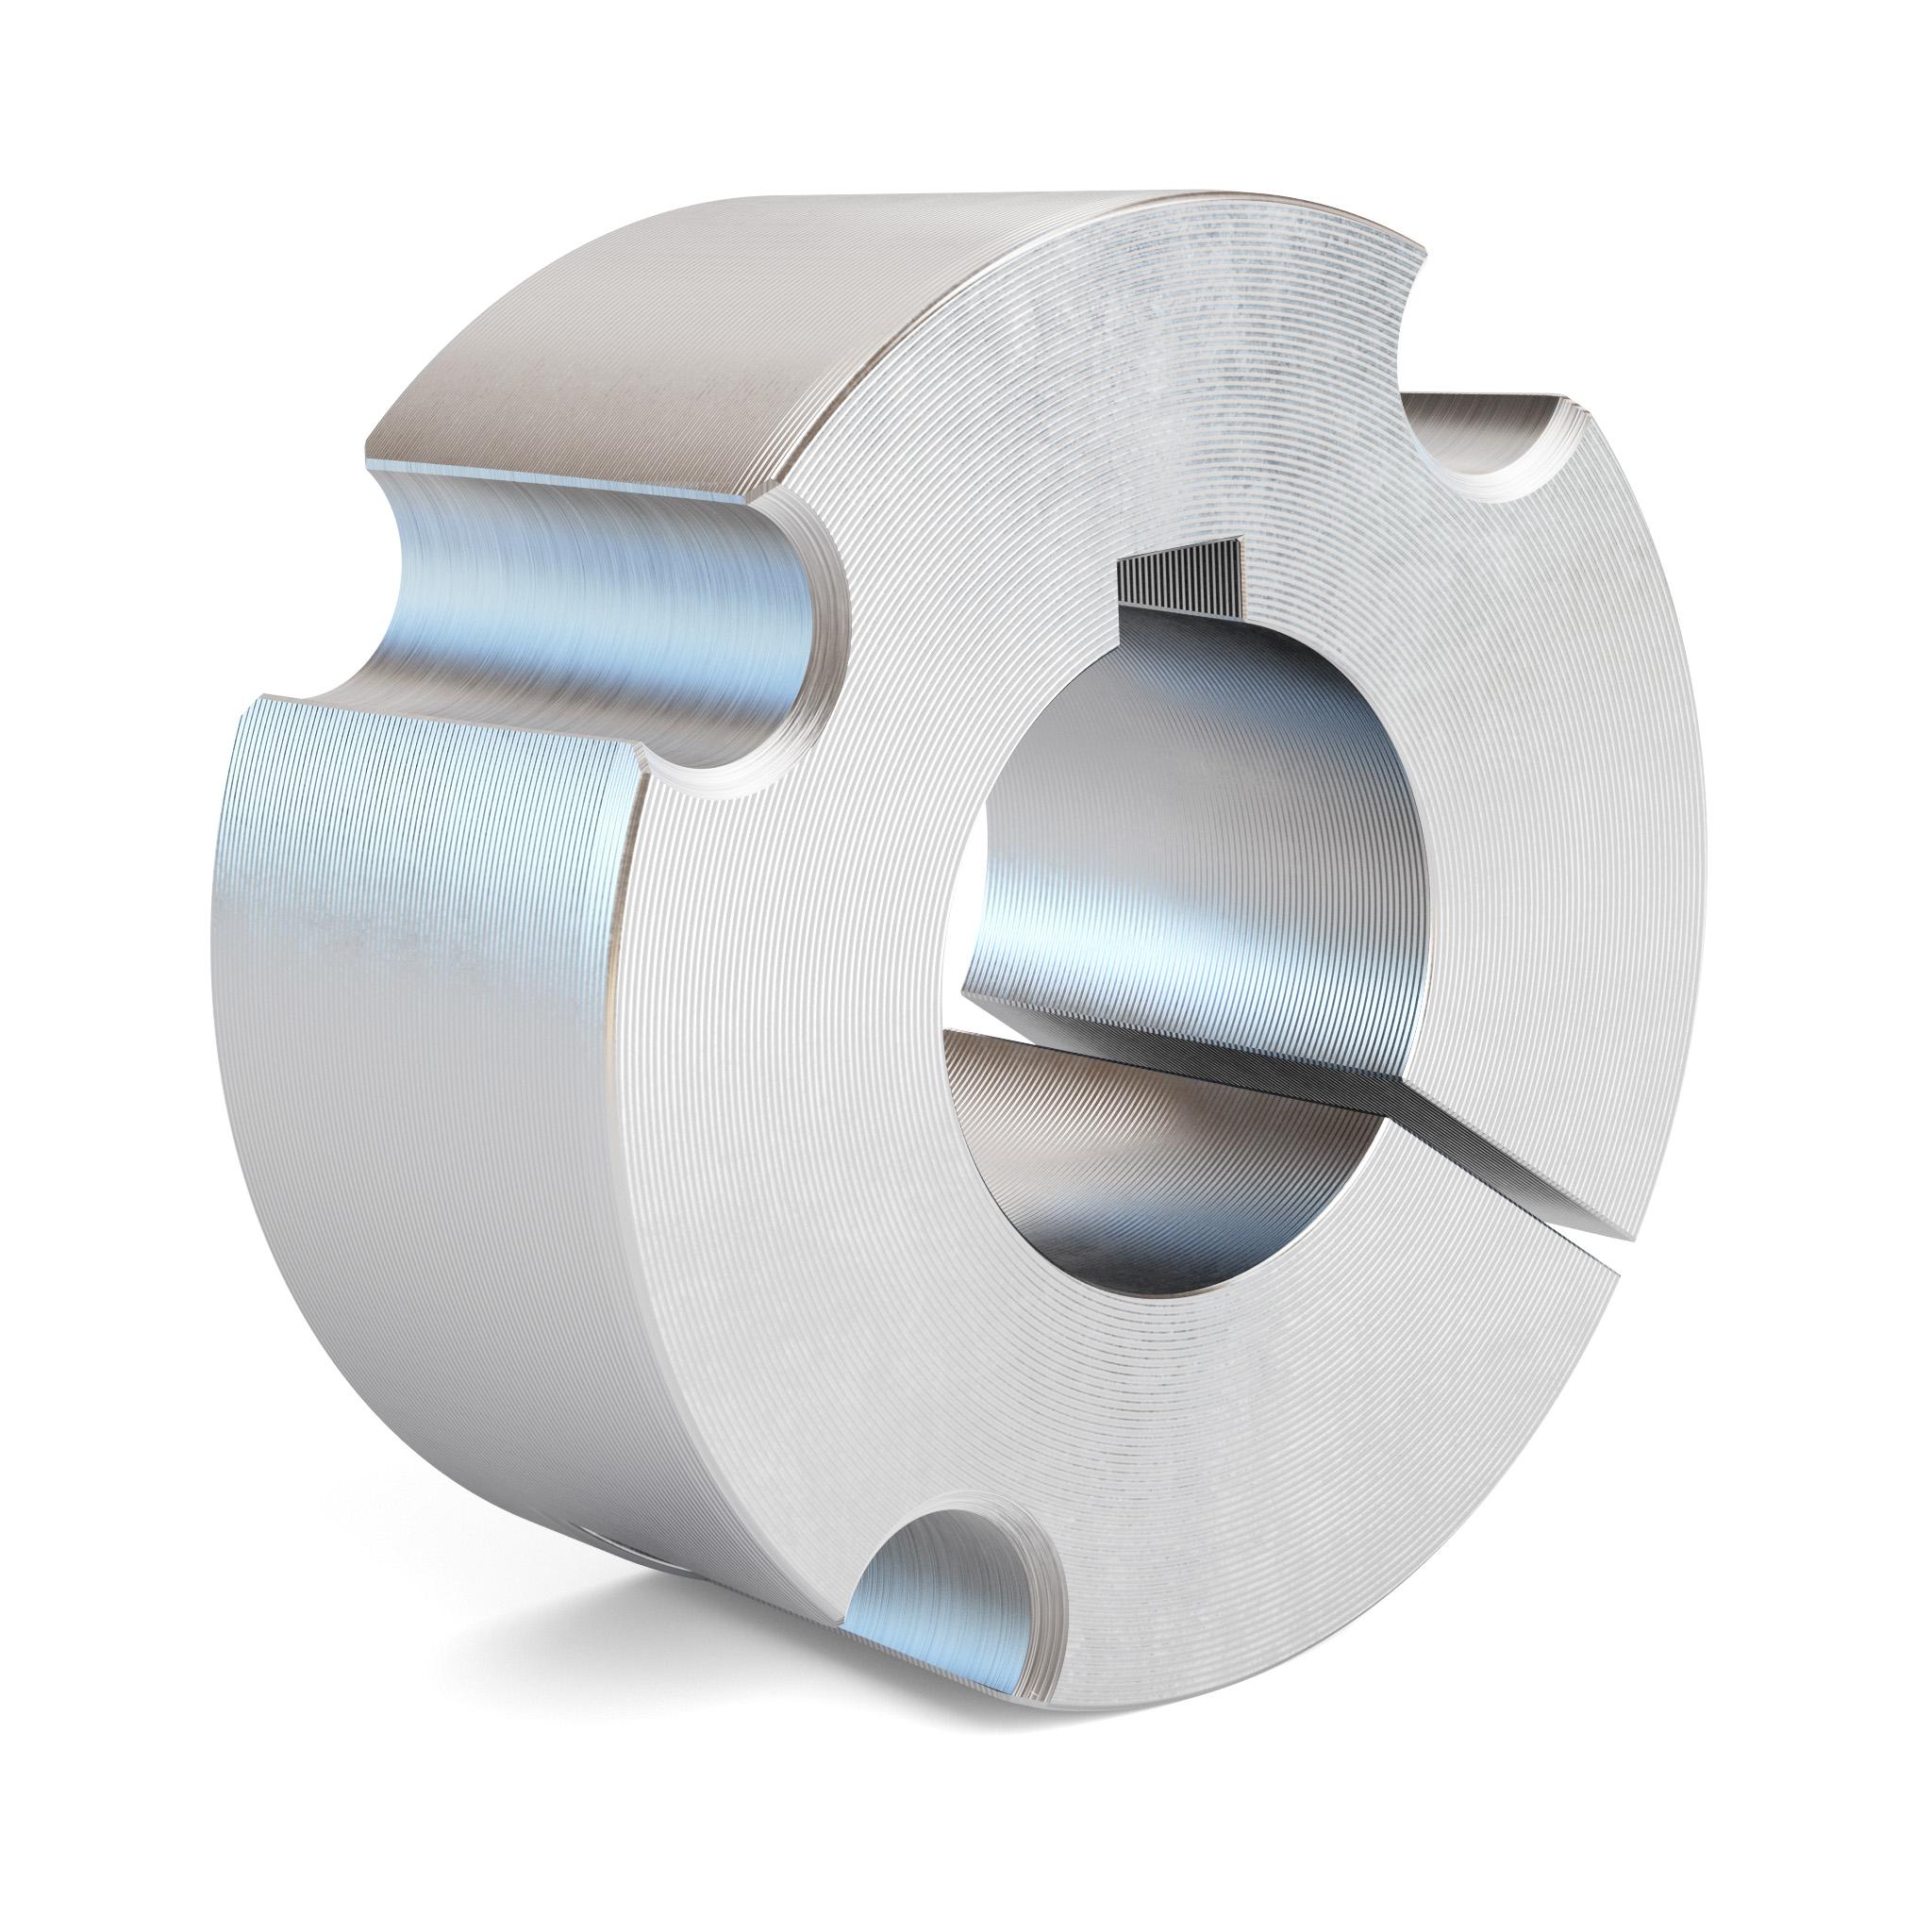 Gates 3535 2.1/8 Taper-Lock Bushings, 3535 2.1/8 BUSH 13 X 6Use with all Taper-Lock® style sheaves, sprockets and pulleys.